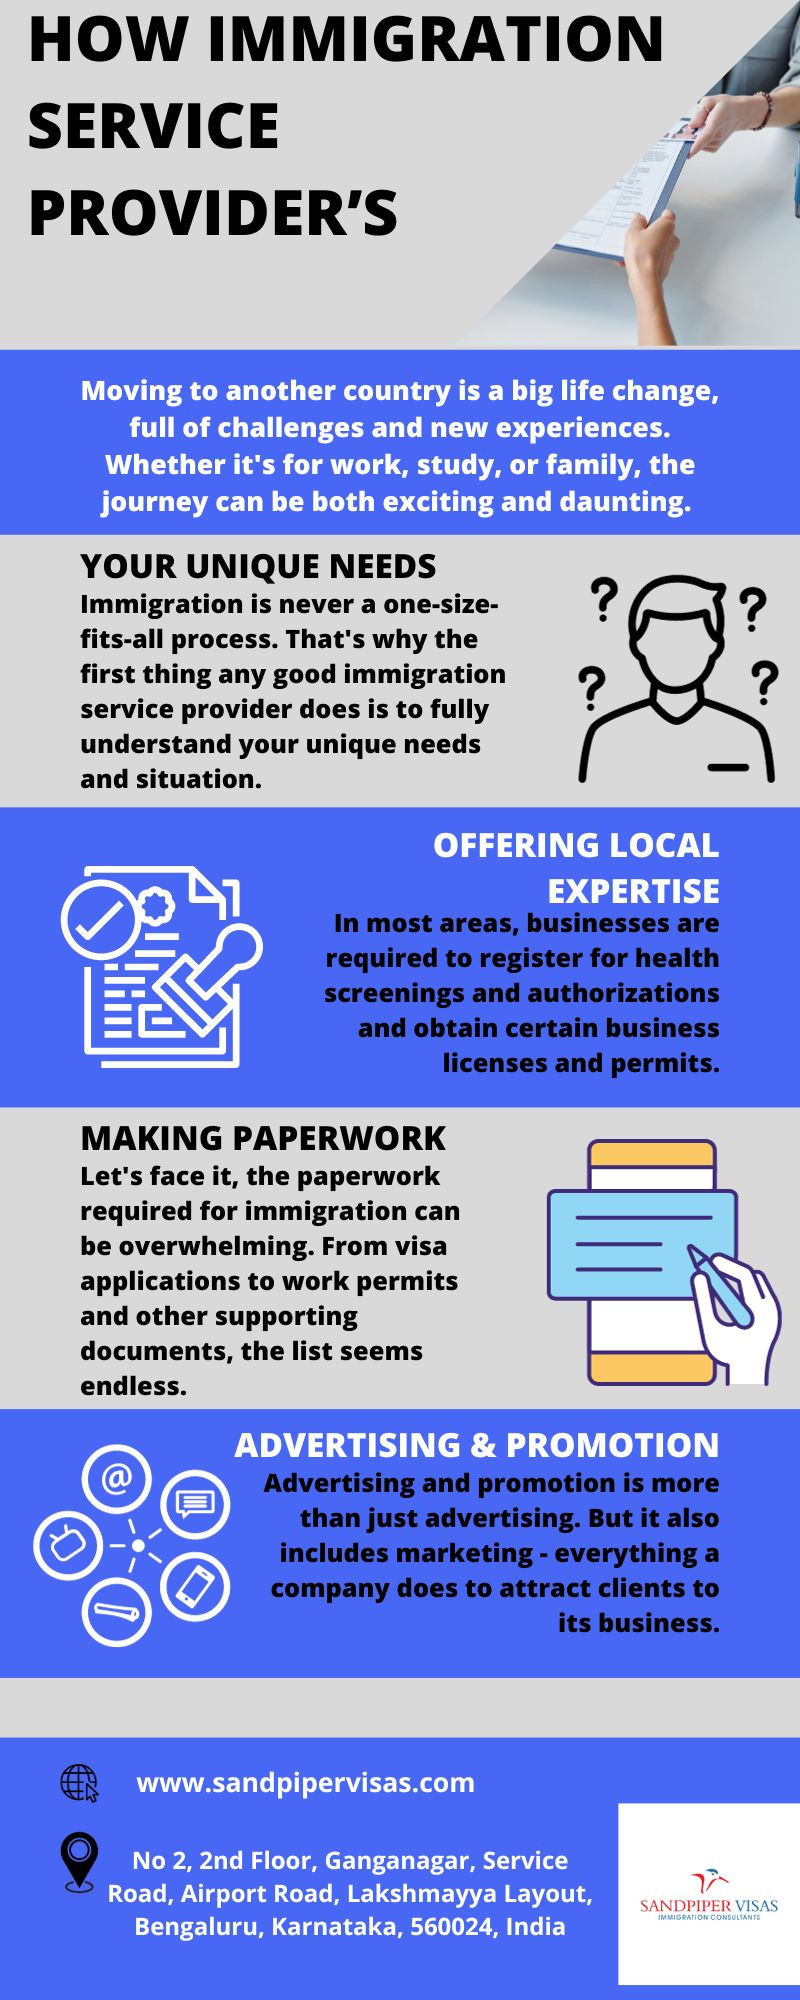 How Immigration Service Provider’s Offer